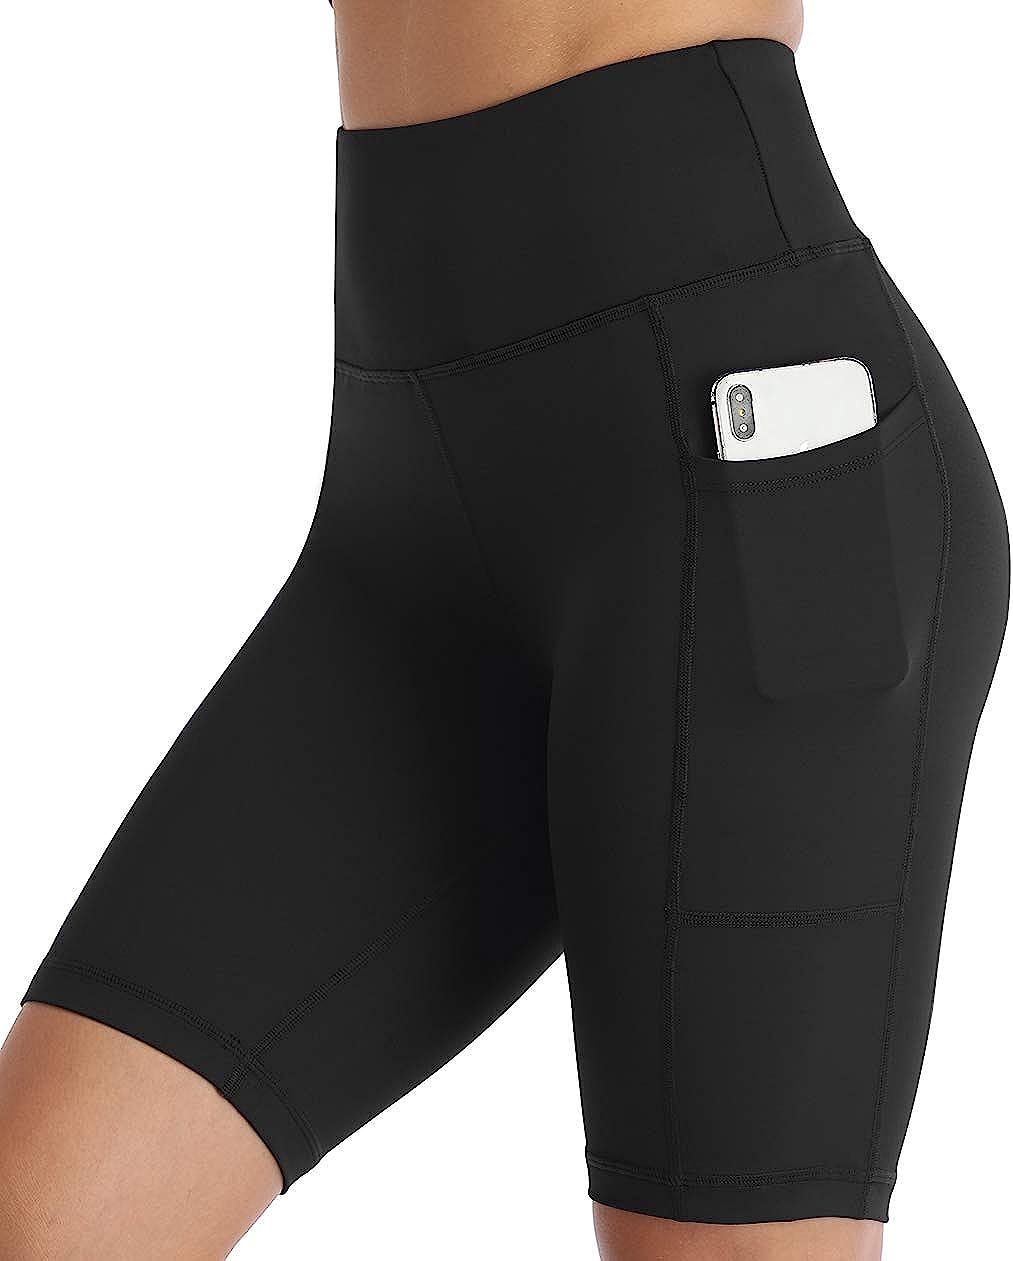 Amazon.com: Amazon Essentials Biker Workout Black Shorts for Women with Pockets Athletic Running ... | Amazon (US)